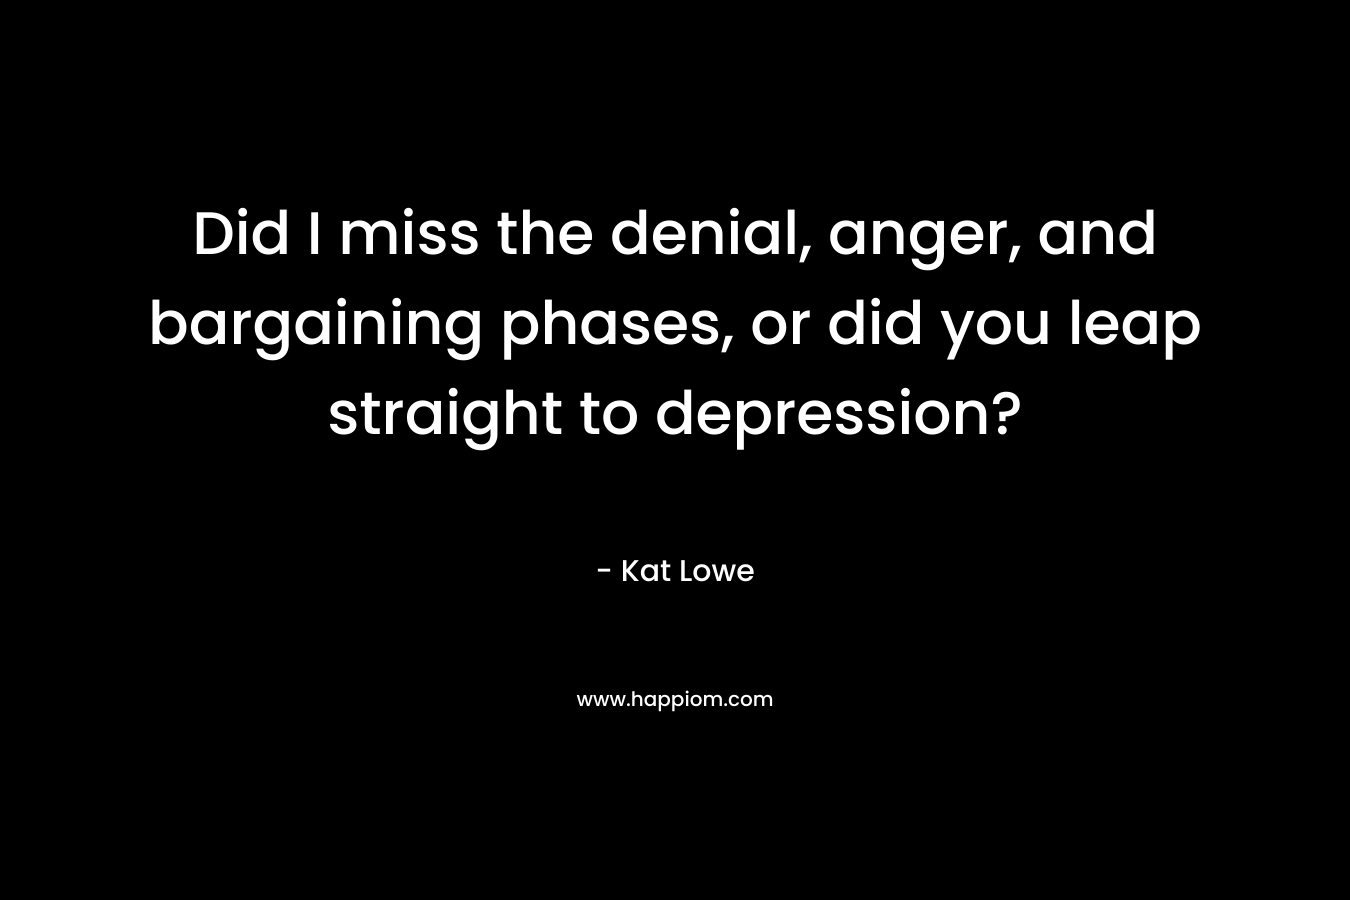 Did I miss the denial, anger, and bargaining phases, or did you leap straight to depression? – Kat Lowe